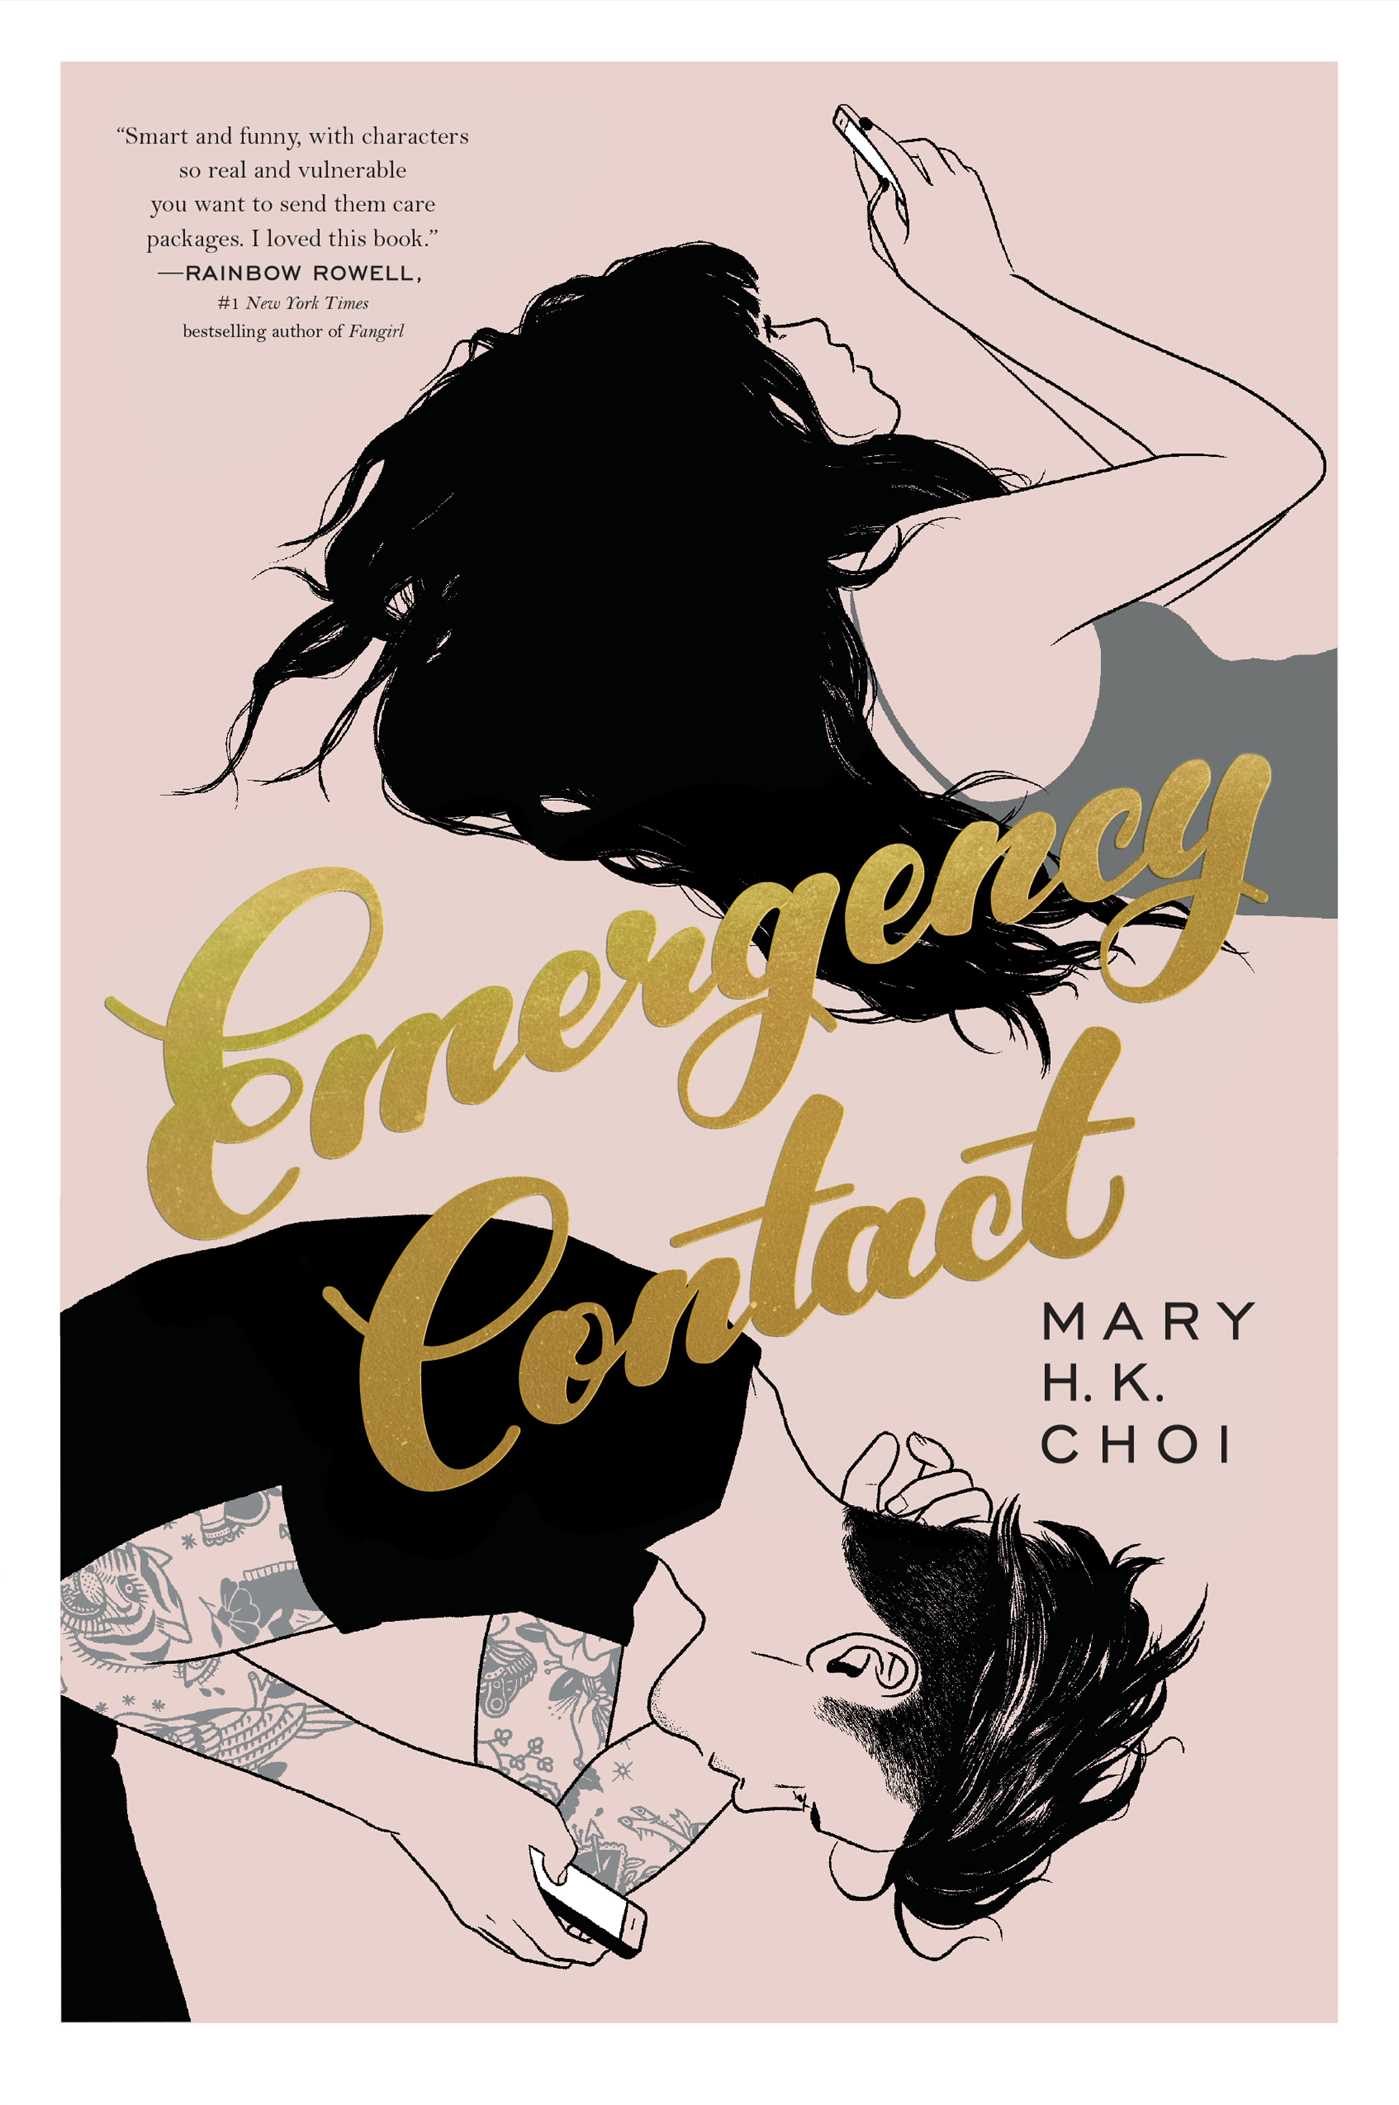 Emergency Contact (Paperback) - image 2 of 2